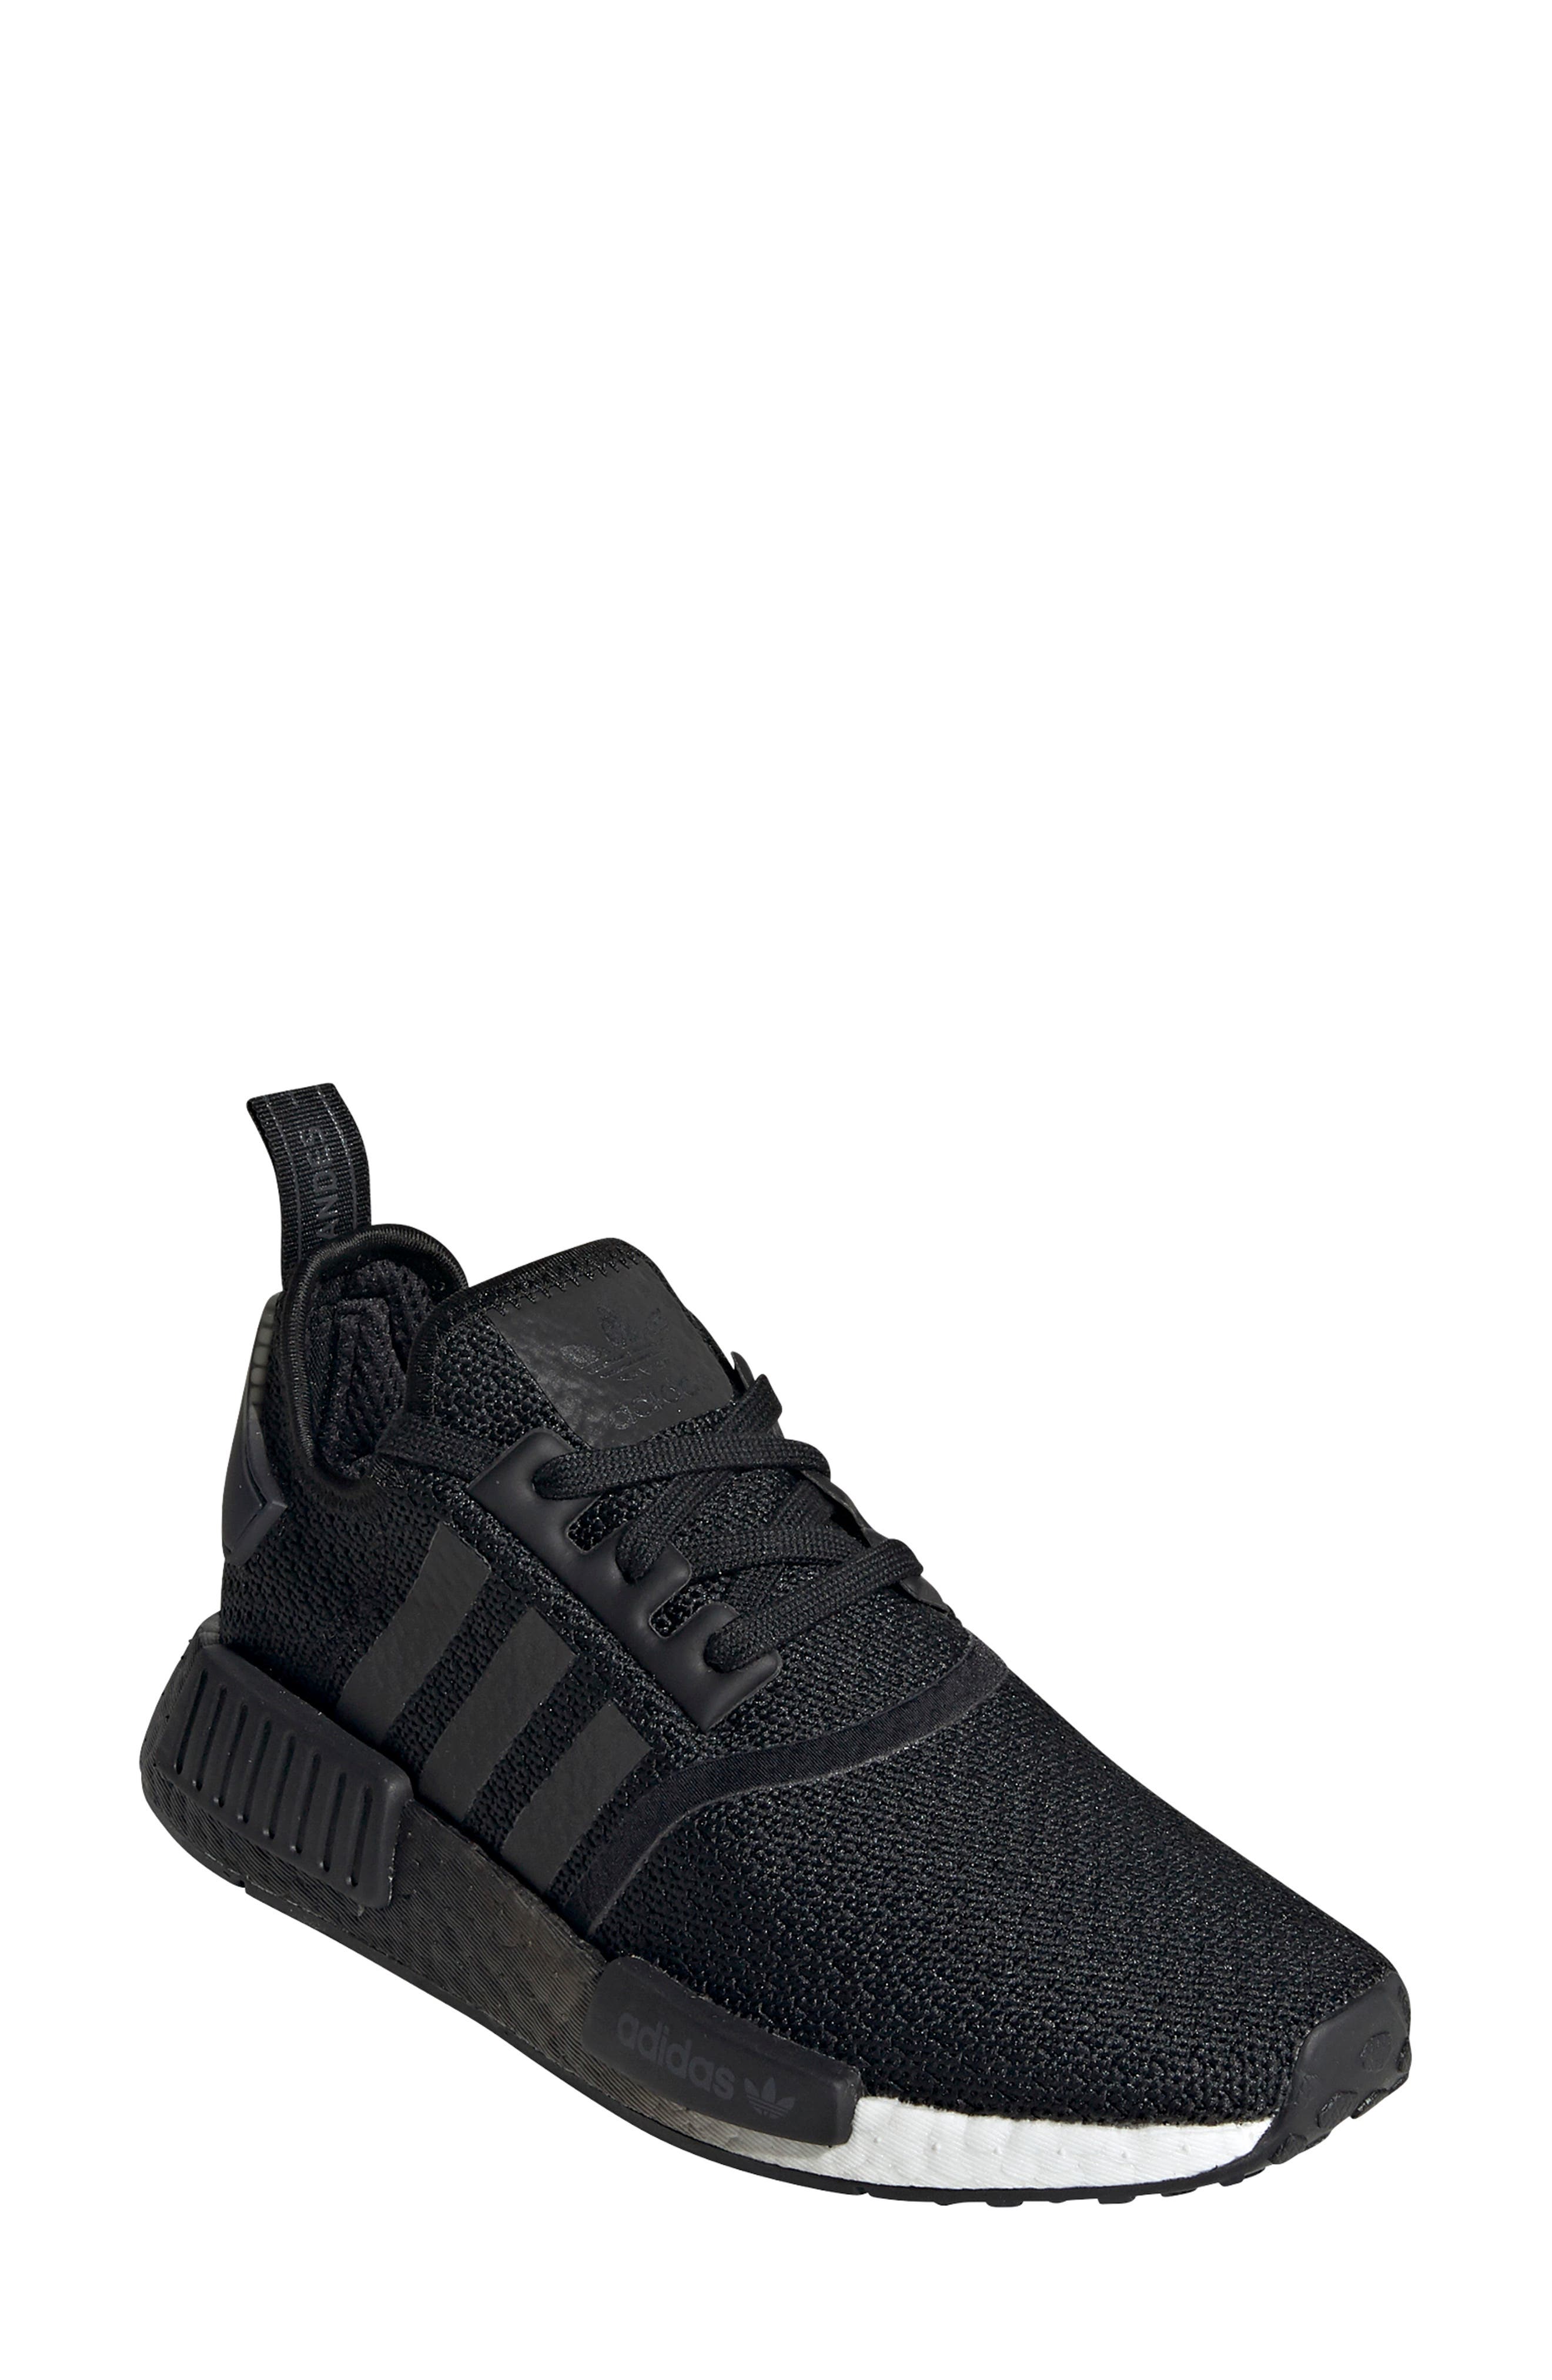 adidas NMD R1 Sneaker in Core Black/white